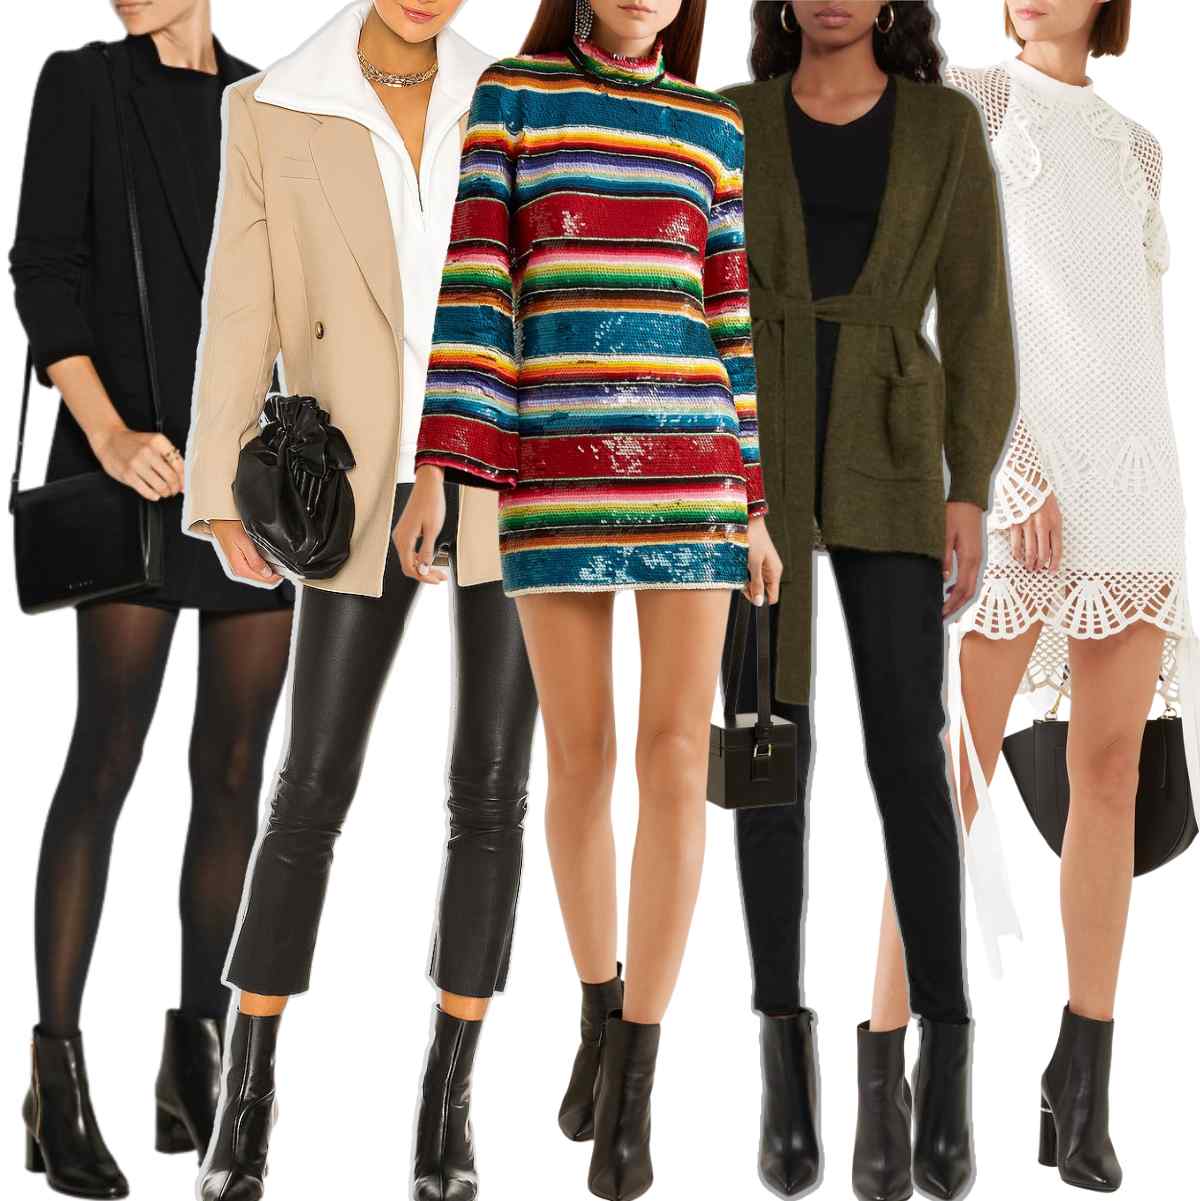 Collage of 5 women wearing different outfits with black ankle boots.